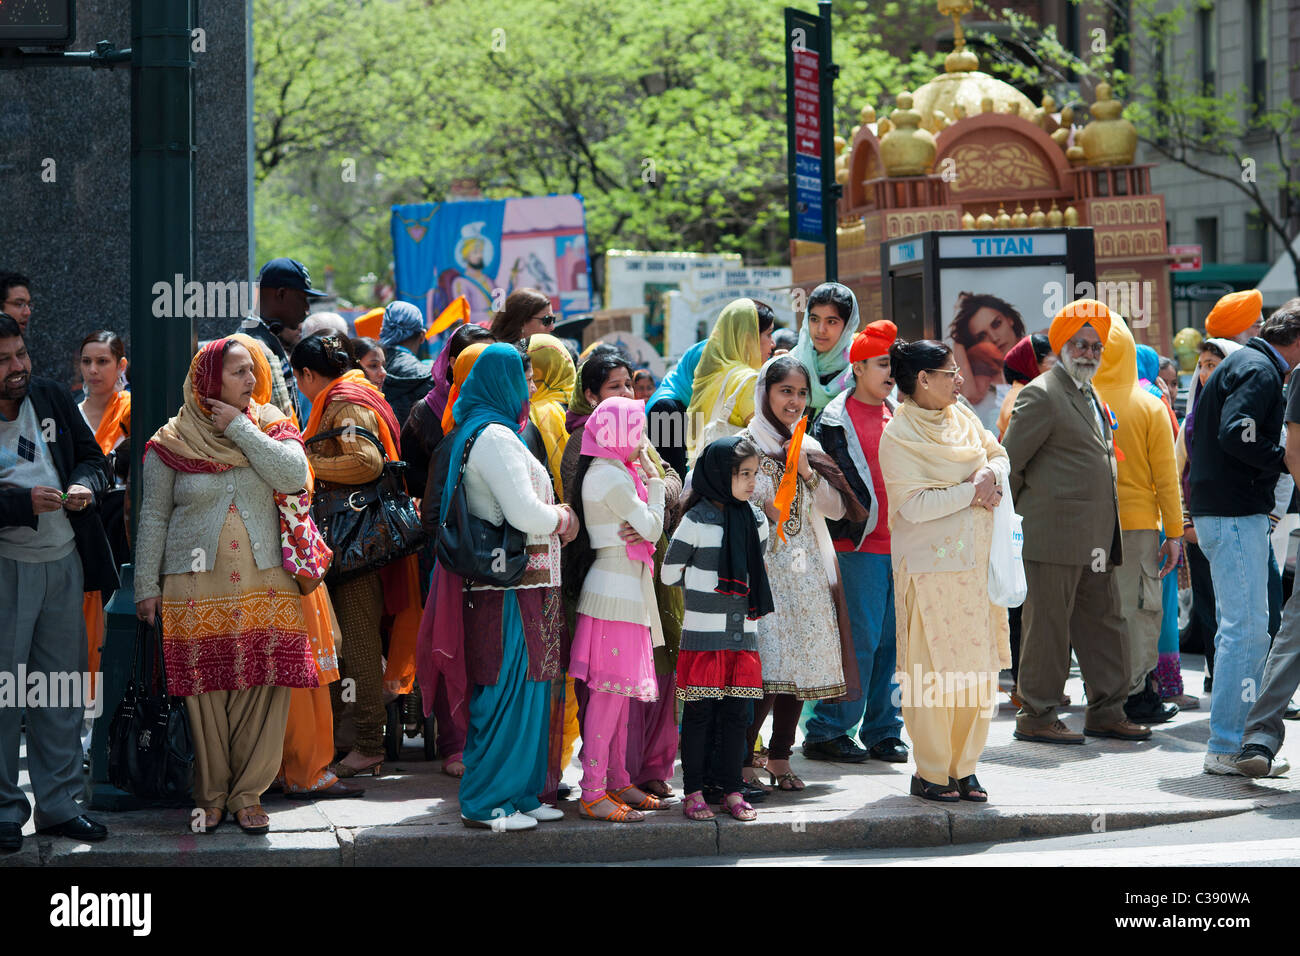 Thousands watch and participate in the 24th Annual Sikh Day Parade in